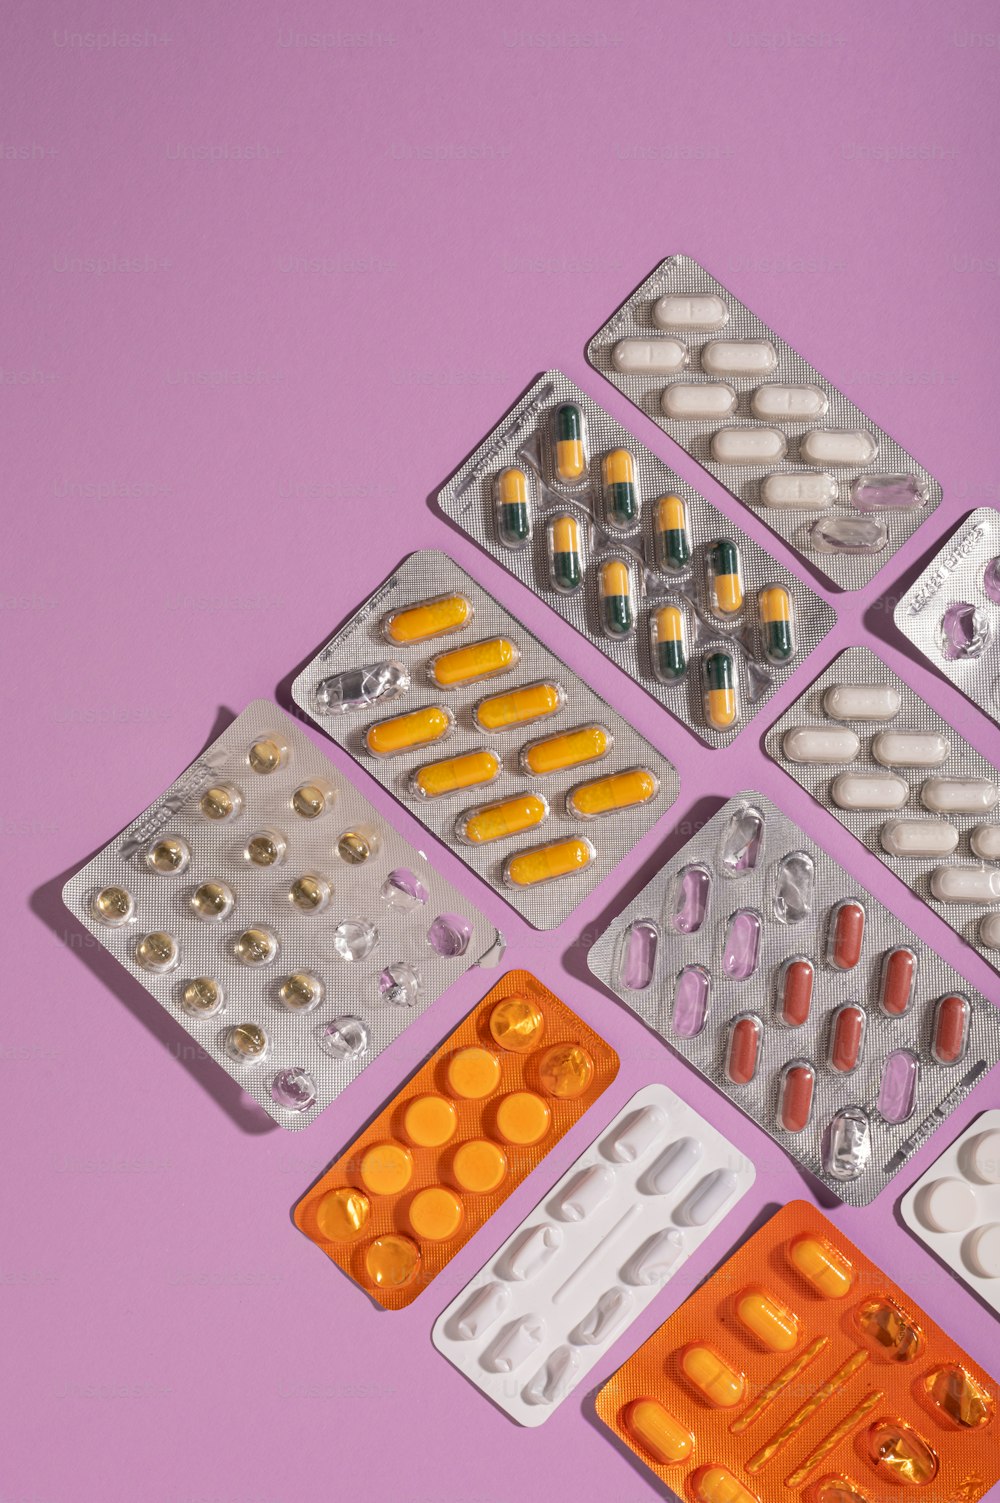 a group of pills and tablets on a purple background